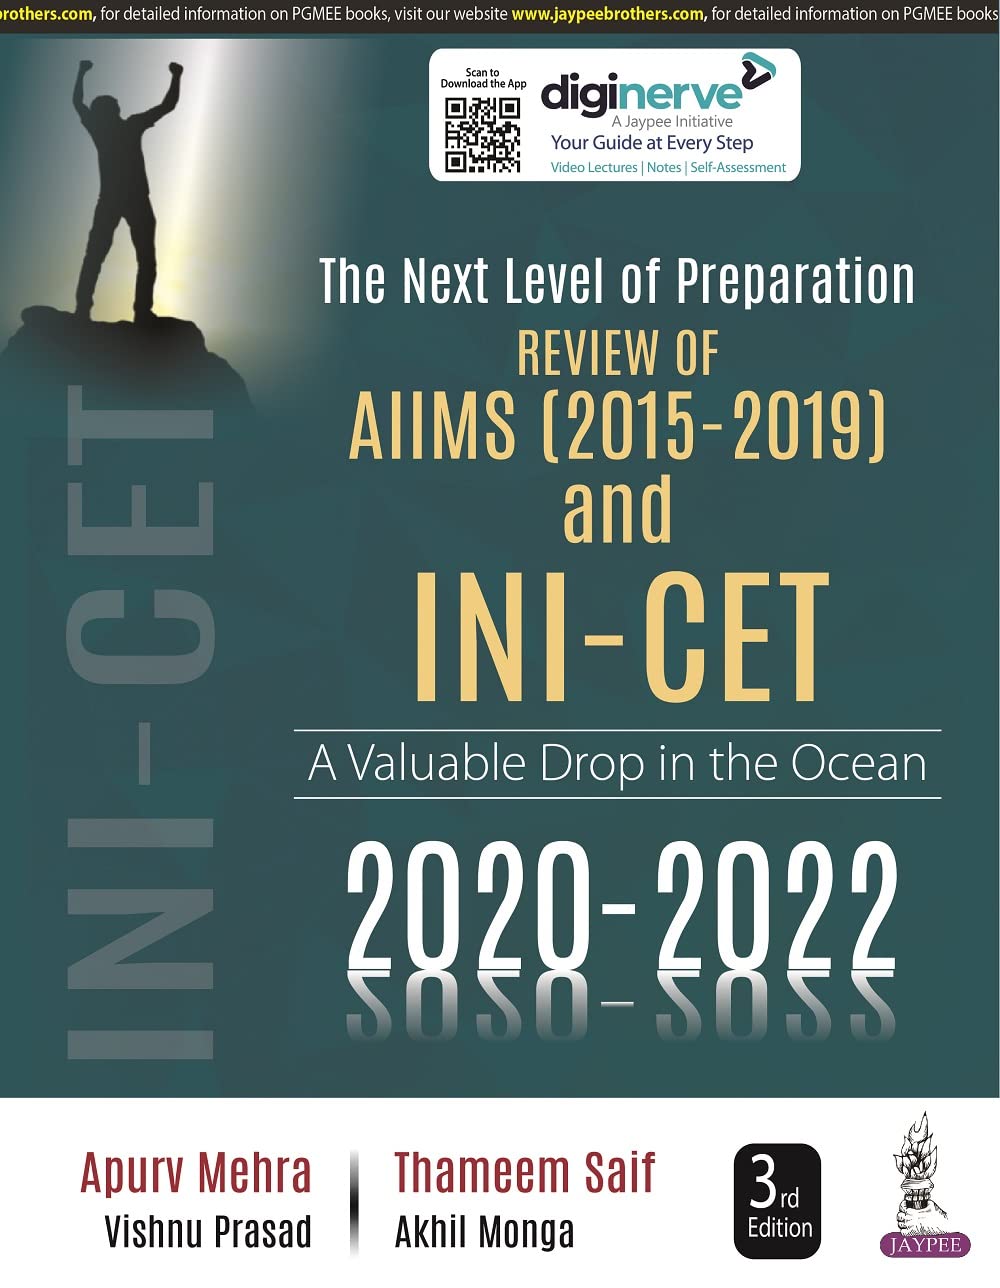 Review of AIIMS & INICET